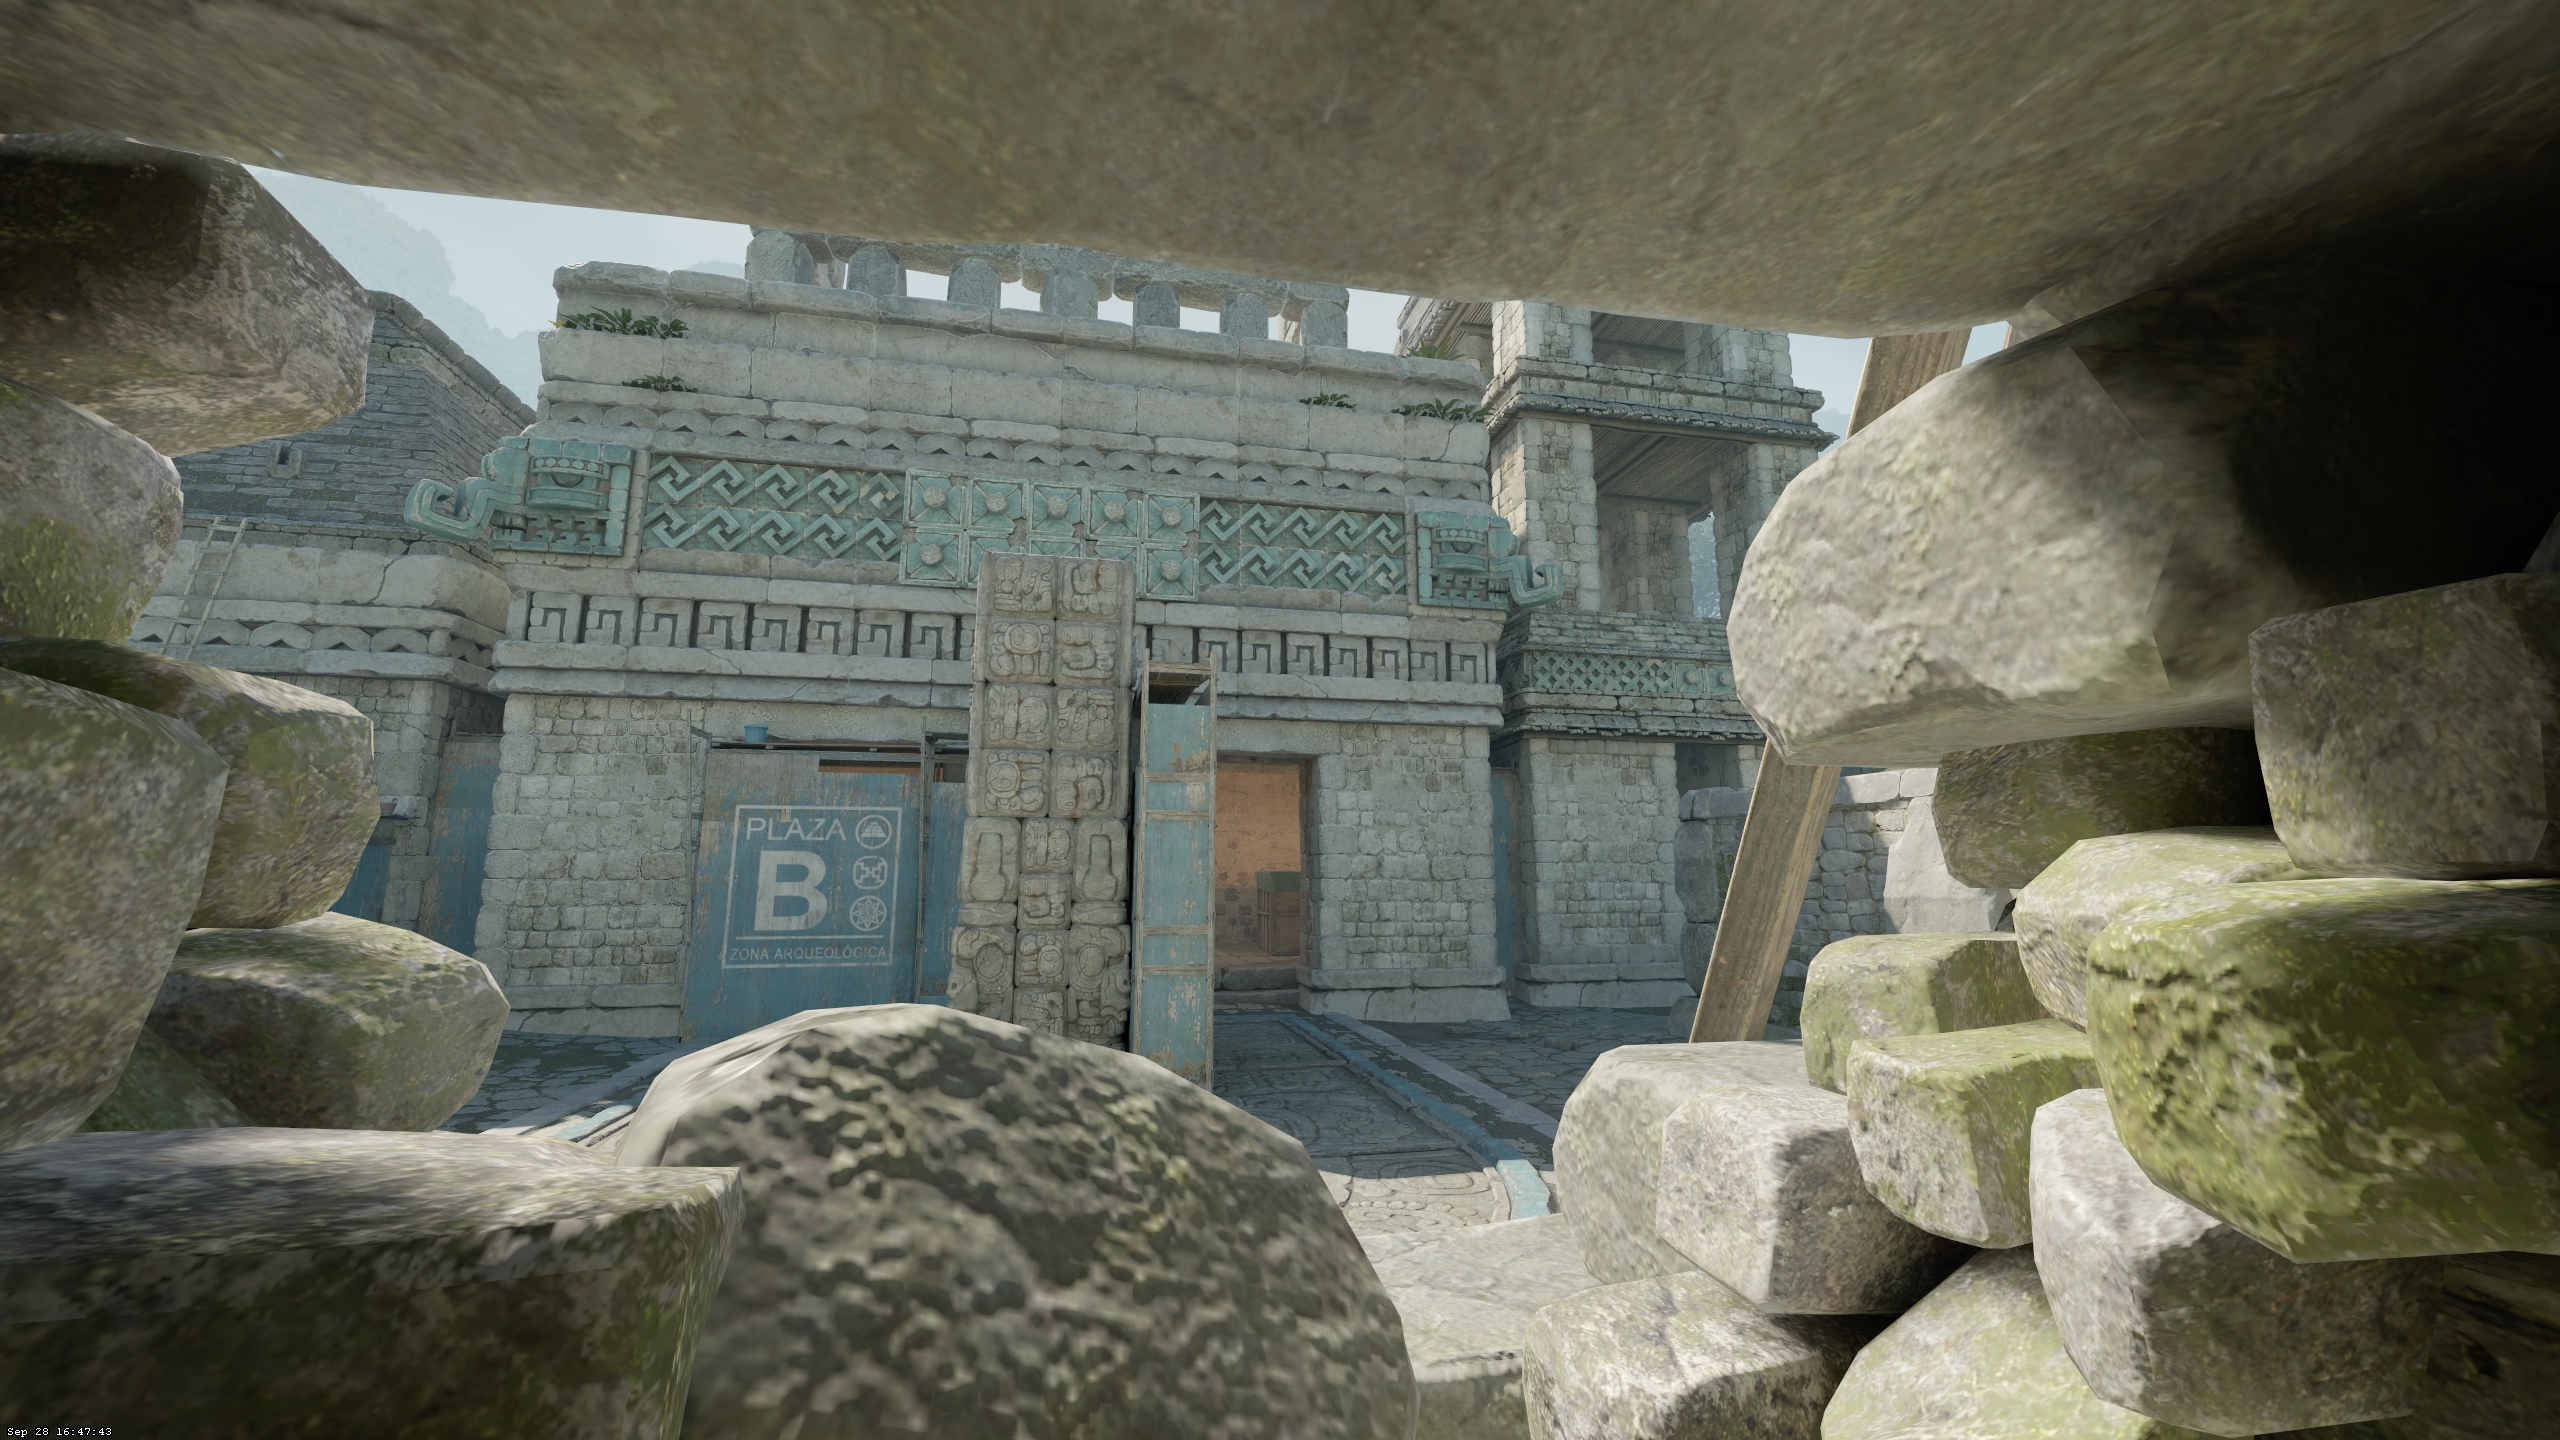 All Counter-Strike 2 map enhancements